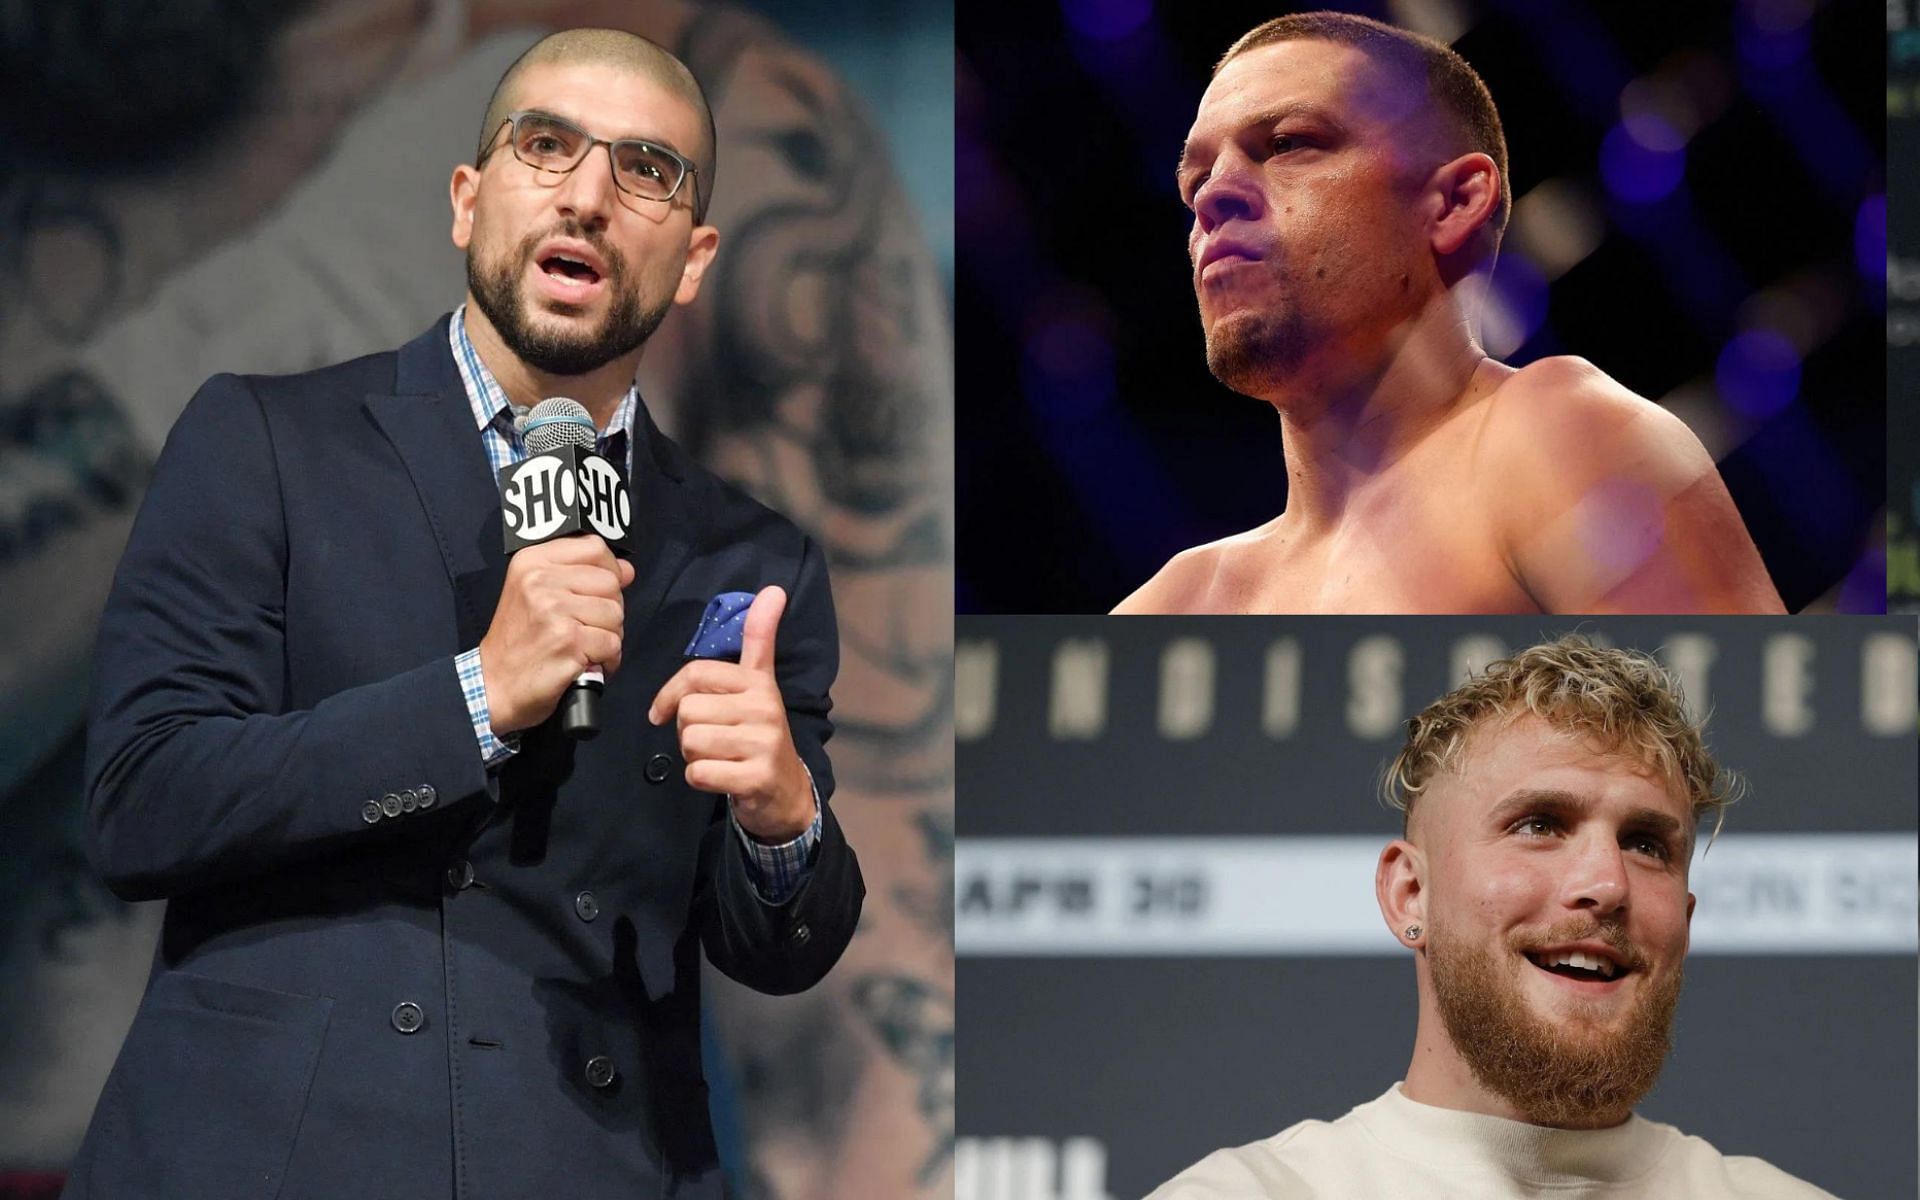 Ariel Helwani (left), Nate Diaz (top right), Jake Paul (bottom right) [Images courtesy of Getty]